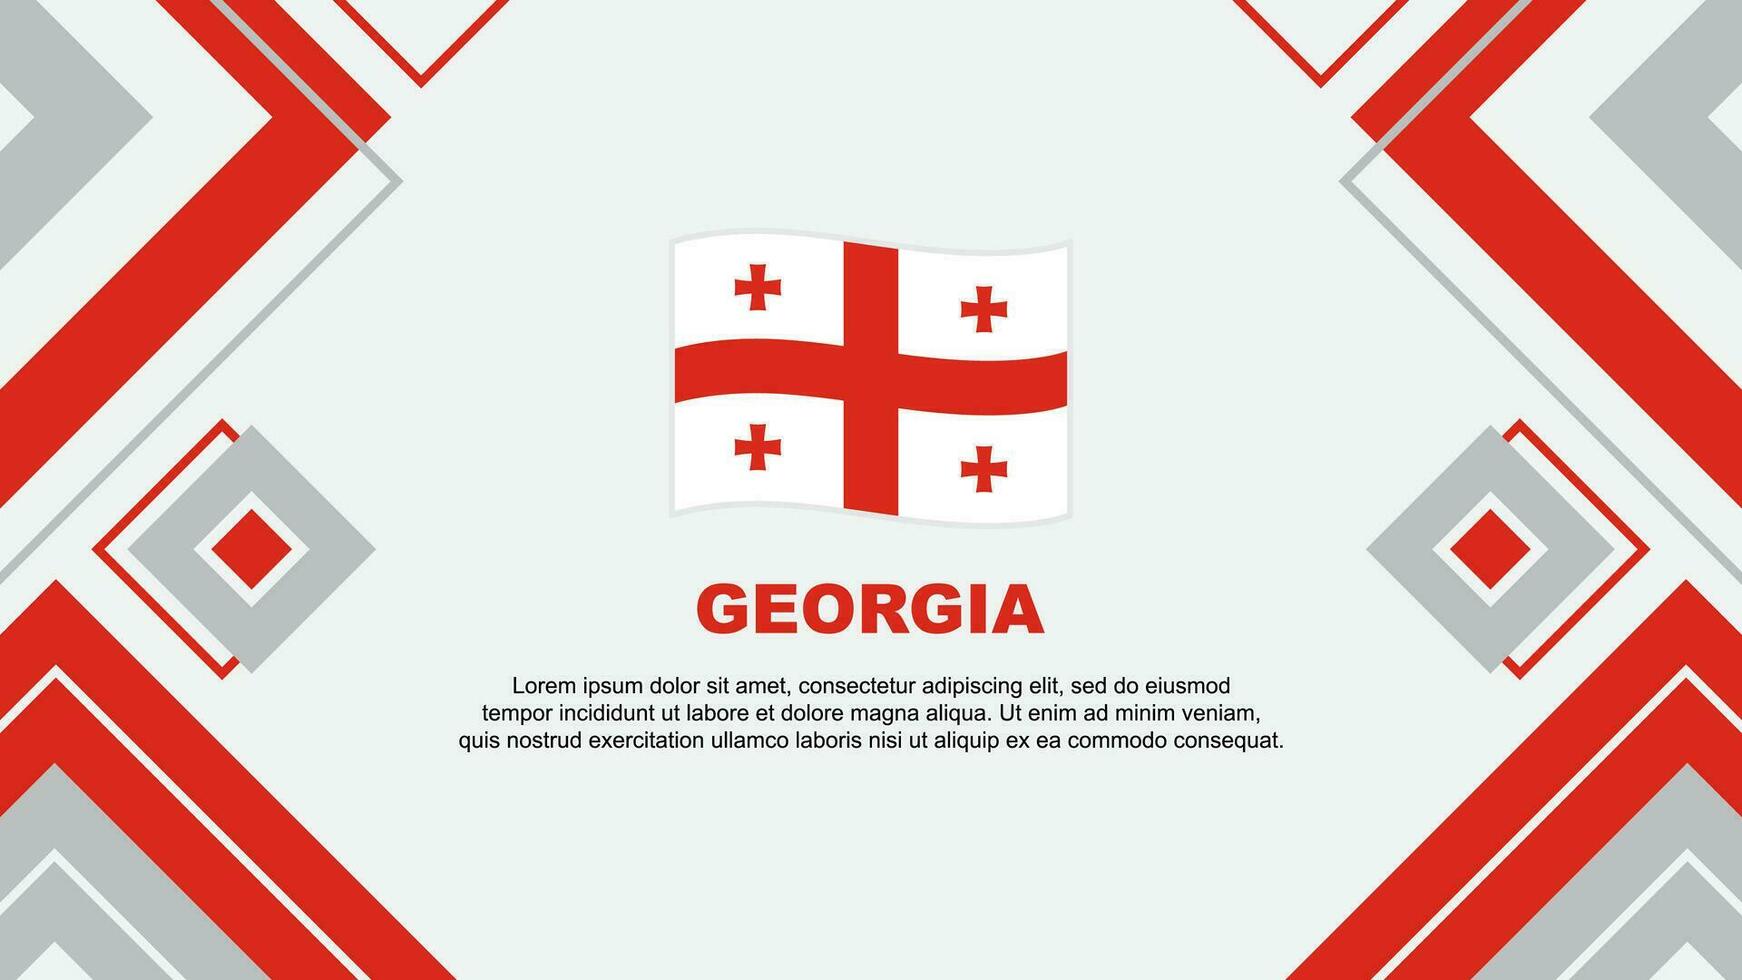 Georgia Flag Abstract Background Design Template. Georgia Independence Day Banner Wallpaper Vector Illustration. Georgia Background